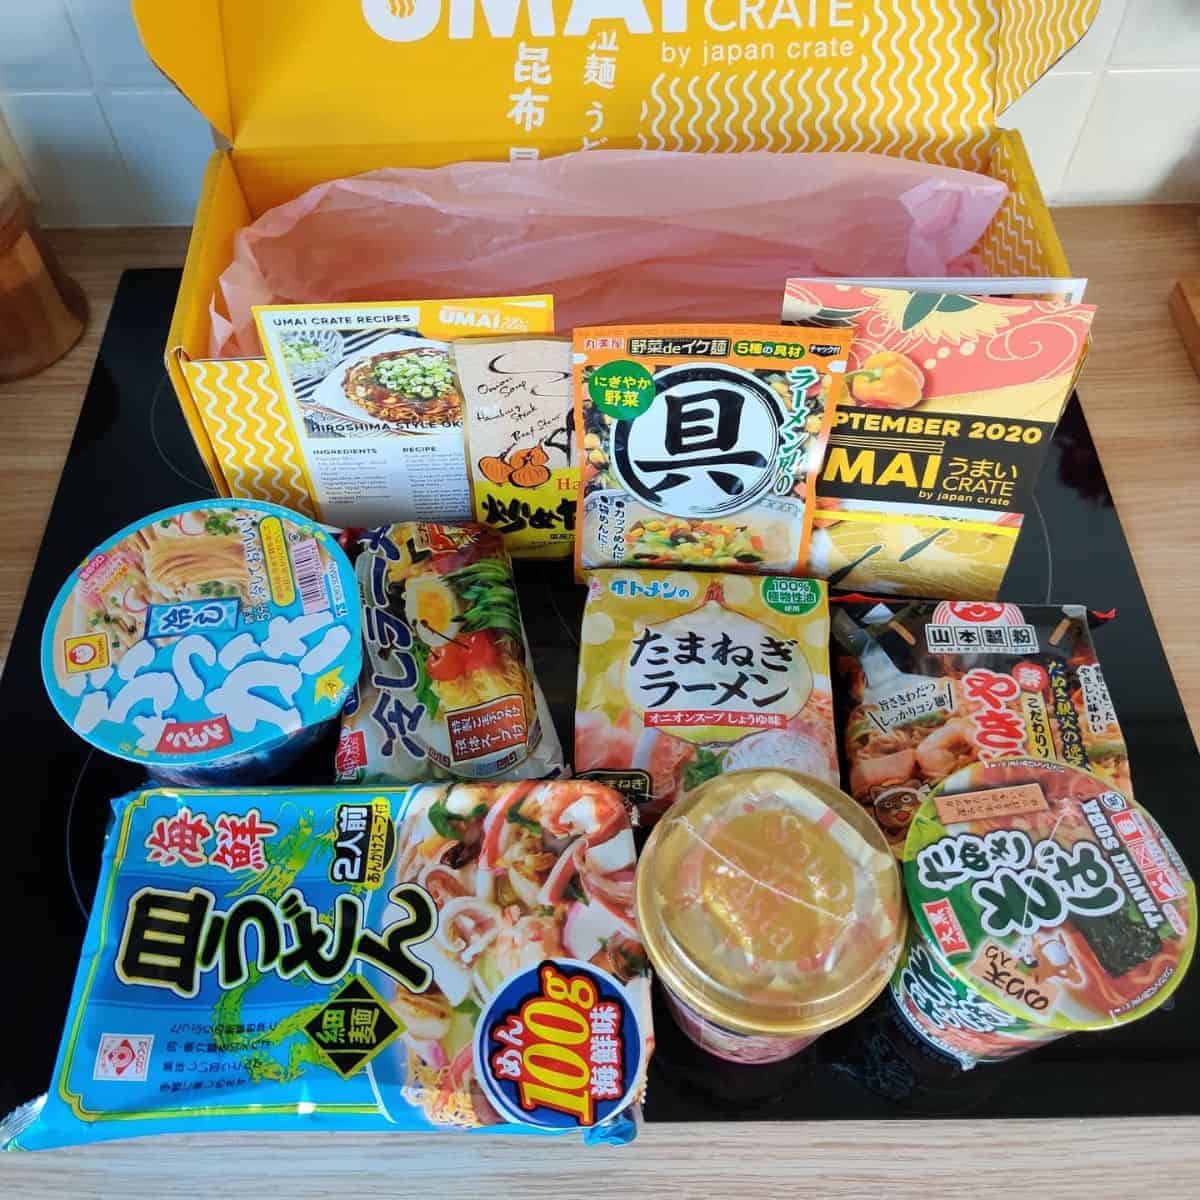 Yellow Umai Crate package full of instant noodles